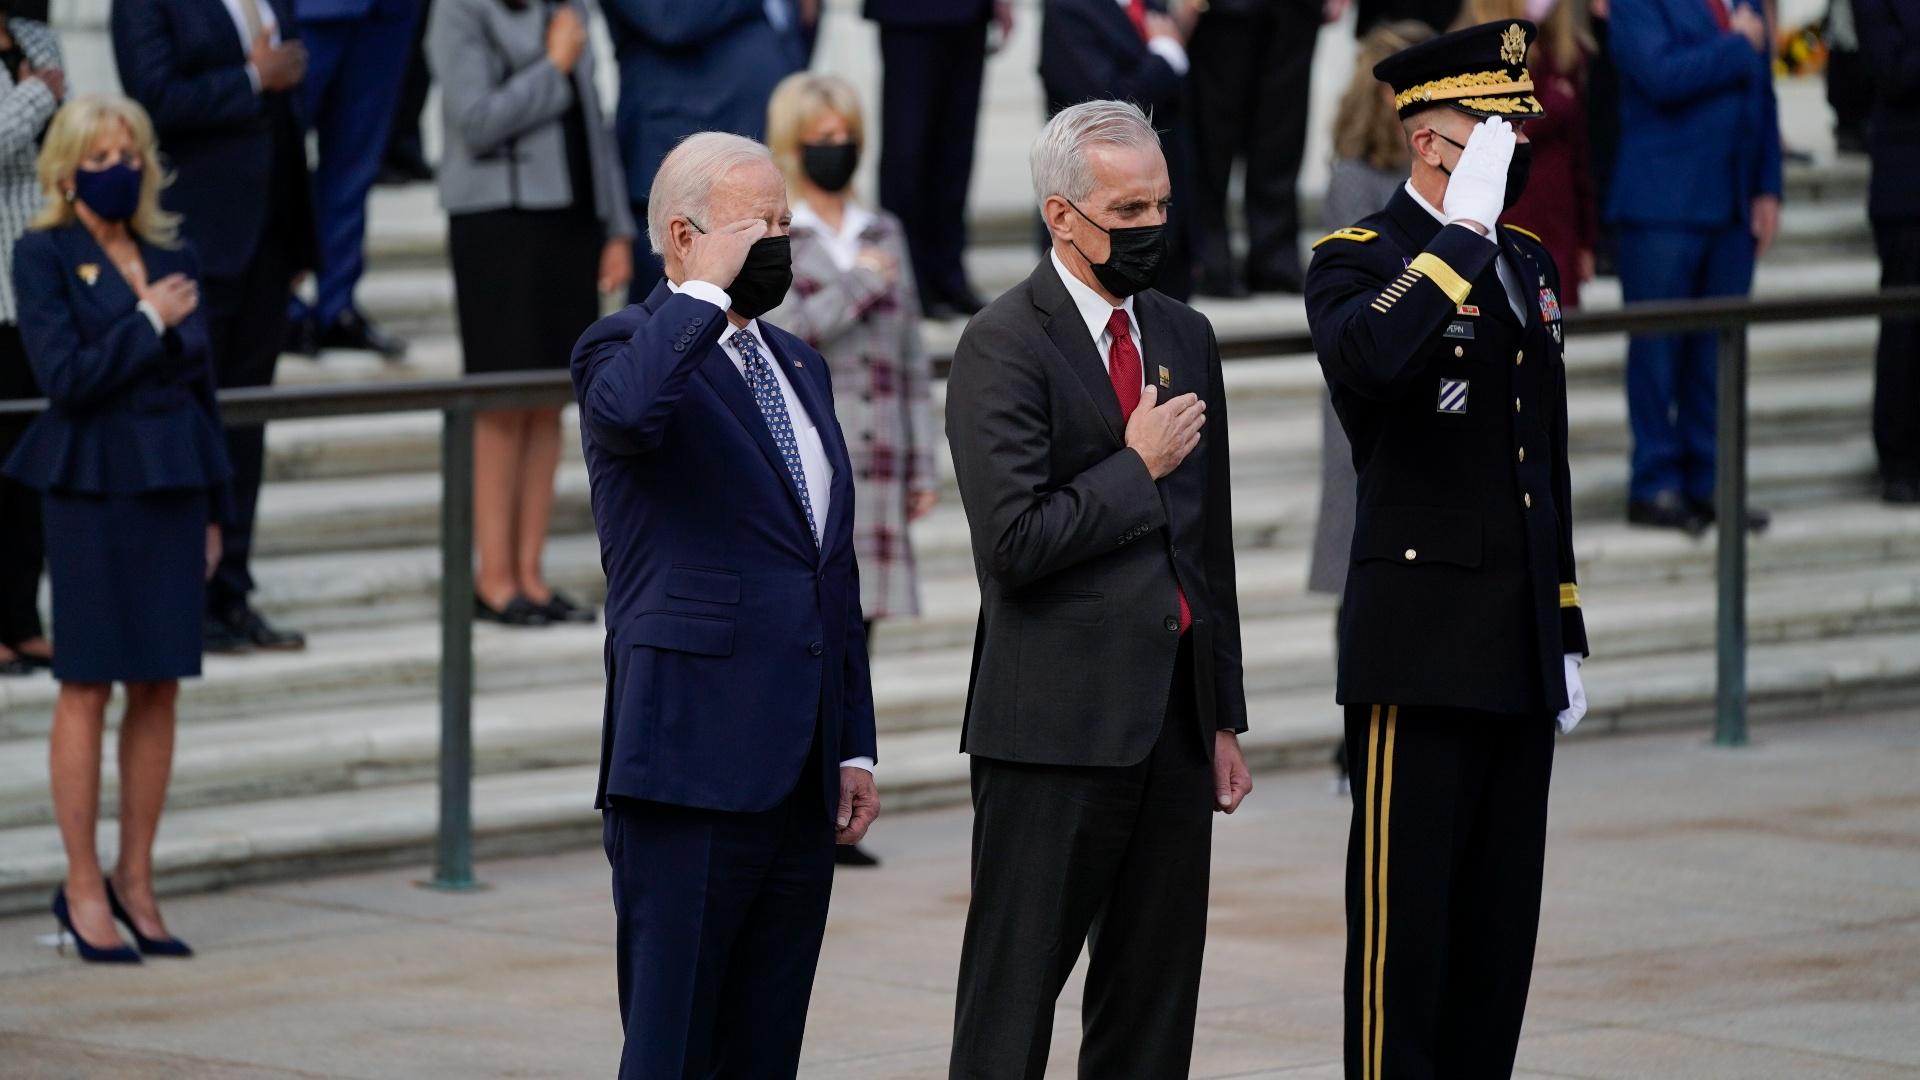 President Joe Biden salutes as he stands with Veterans Affairs Secretary Denis McDonough and Army Maj. Gen. Allan M. Pepin during a wreath laying ceremony to commemorate Veterans Day and mark the centennial anniversary of the Tomb of the Unknown Soldier at Arlington National Cemetery, Thursday, Nov. 11, 2021, in Arlington, Va. First lady Jill Biden is at left. (AP Photo / Evan Vucci)